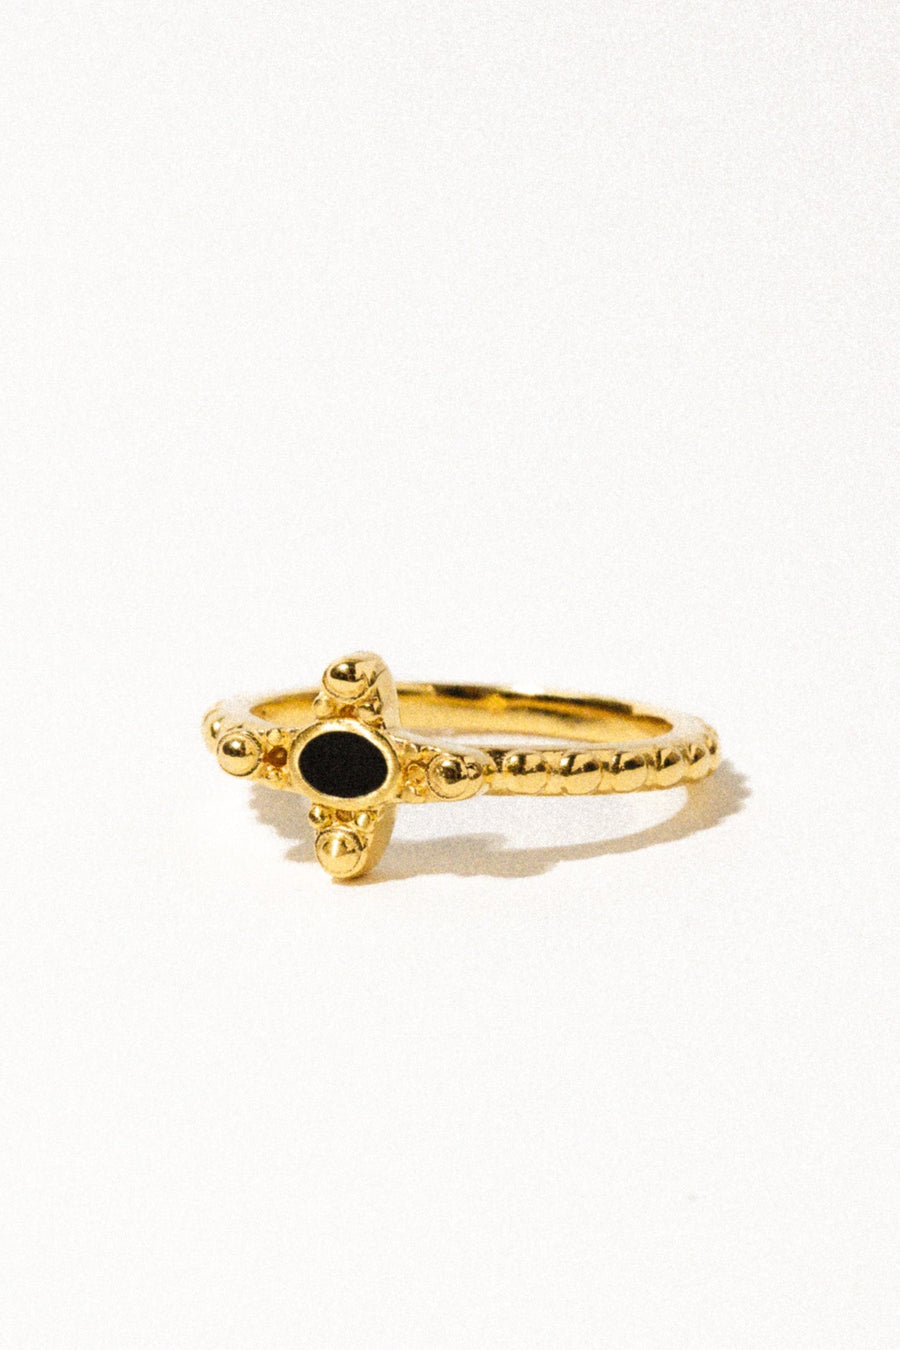 Wildthings Collectables Jewelry US 6 / Gold Timeless Black Stone Ring